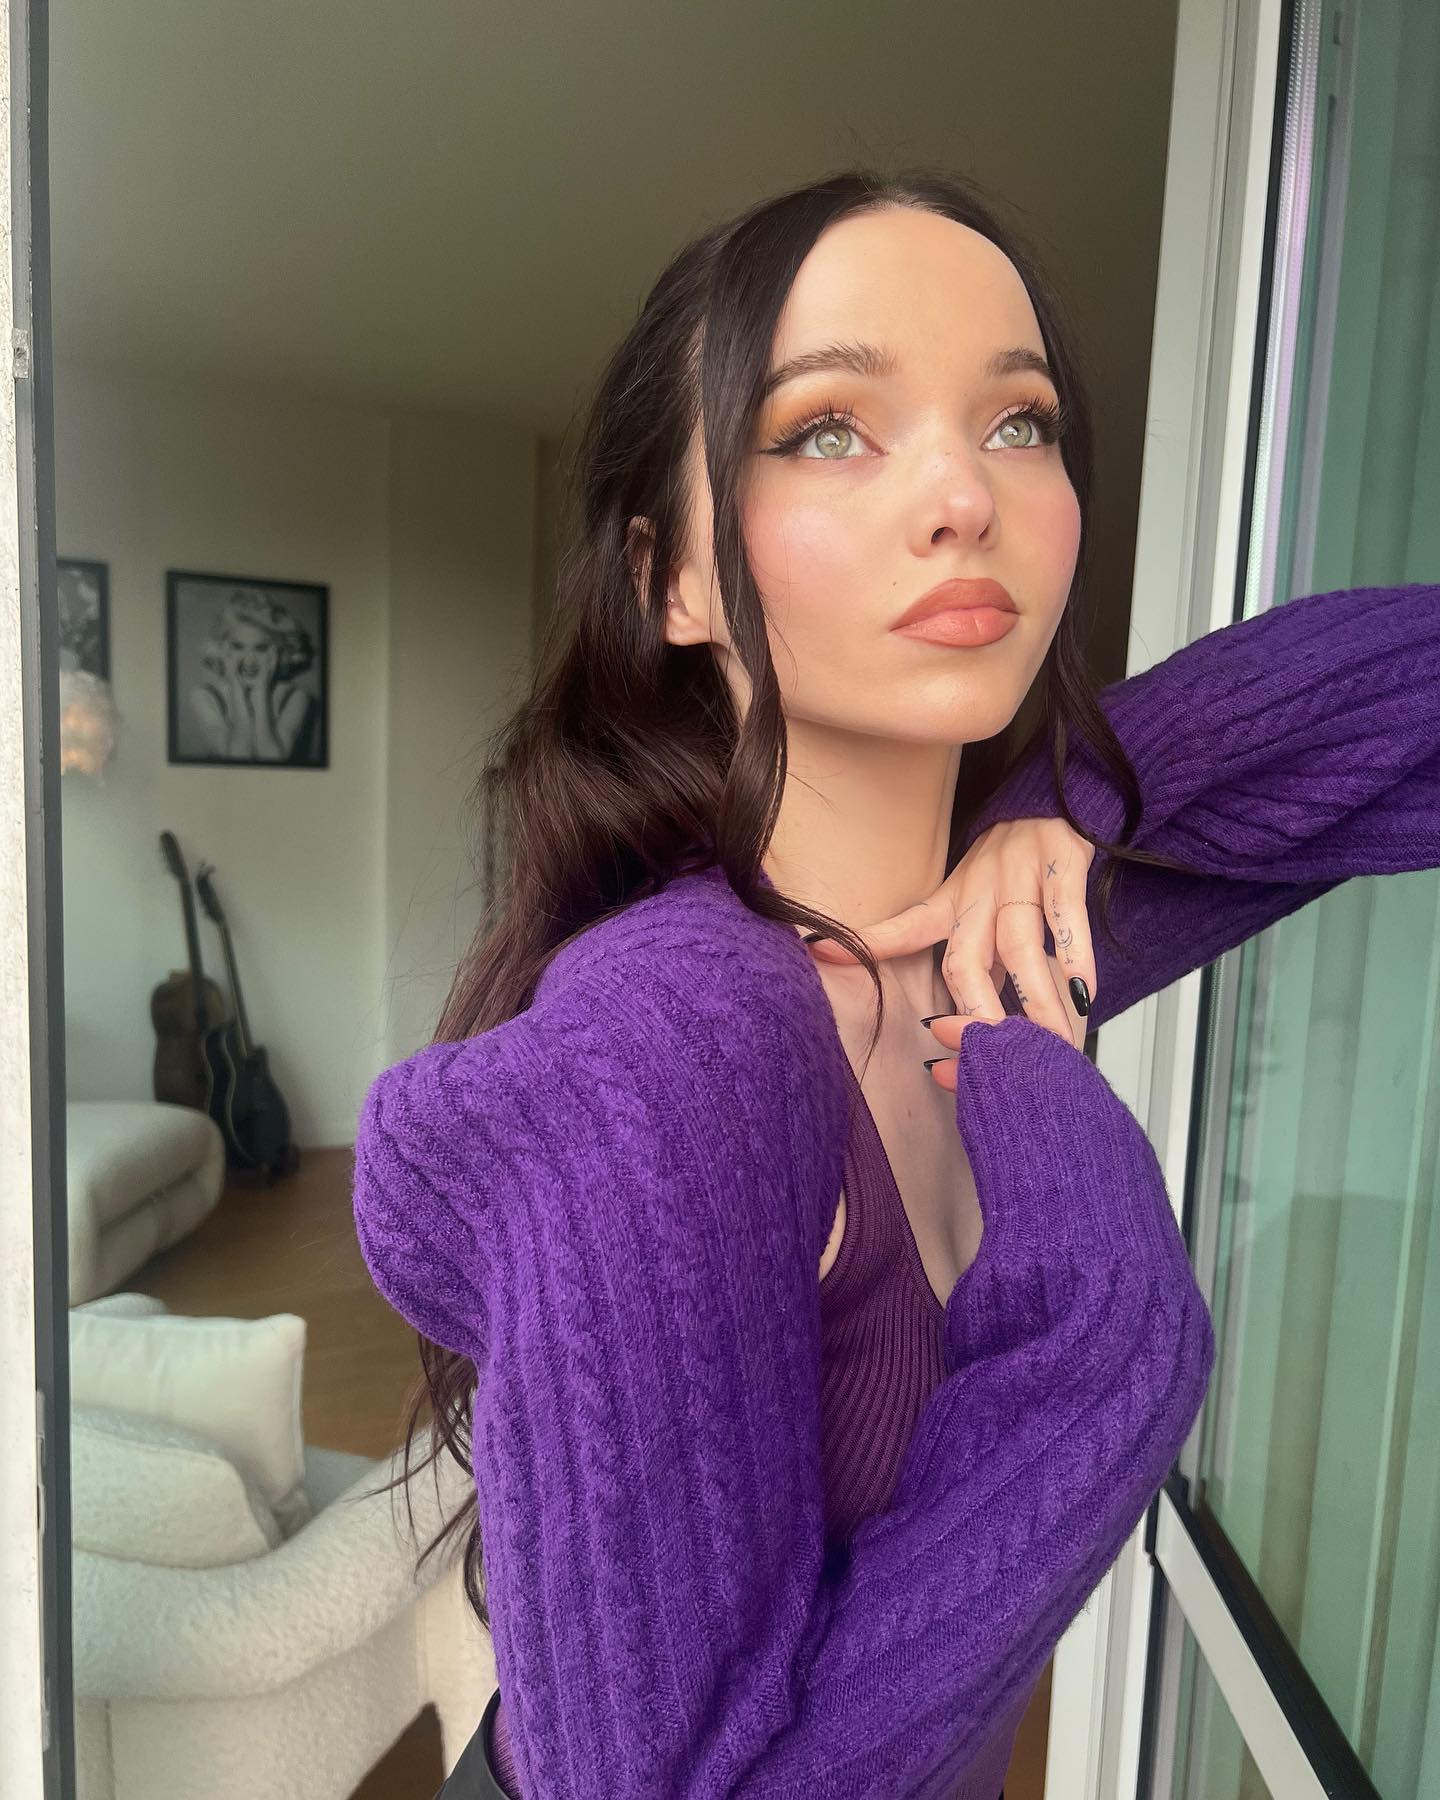 Photos n°5 : Dove Cameron Up Close and Personal!